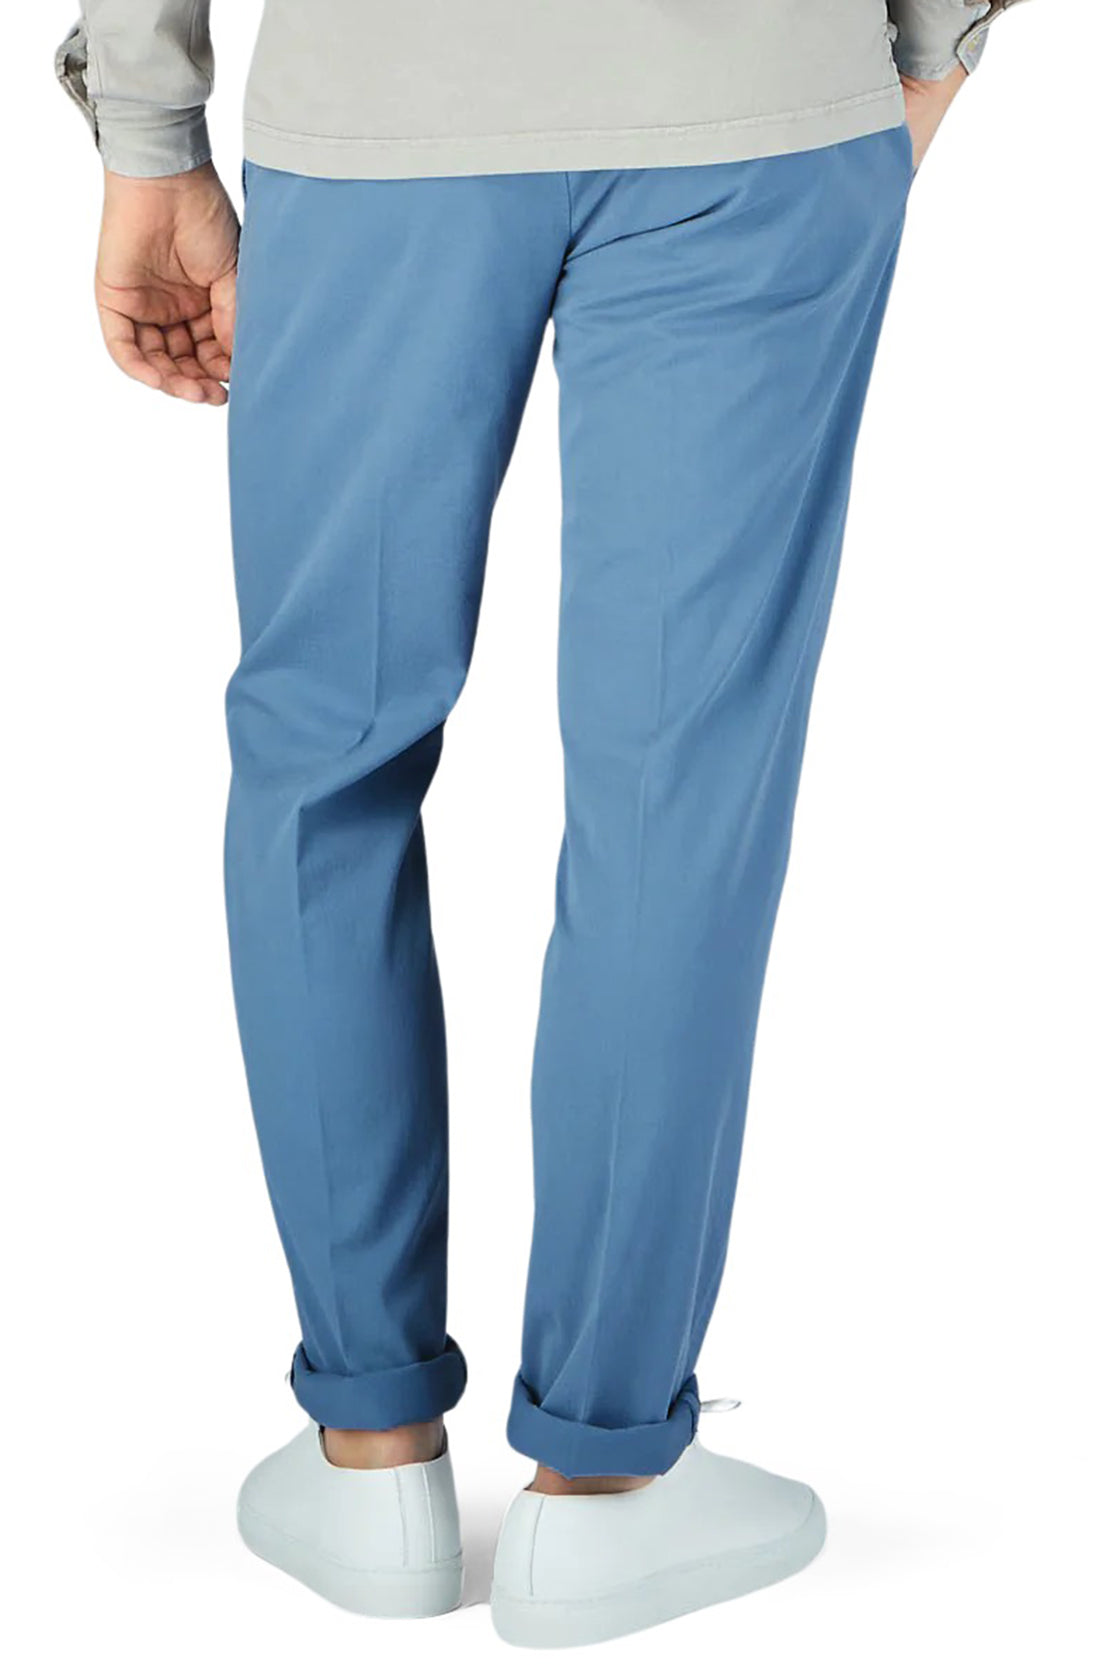 CANALI - Light Blue Chinos In Garment Dyed Cotton Microtwill - 91633-PT00452-407